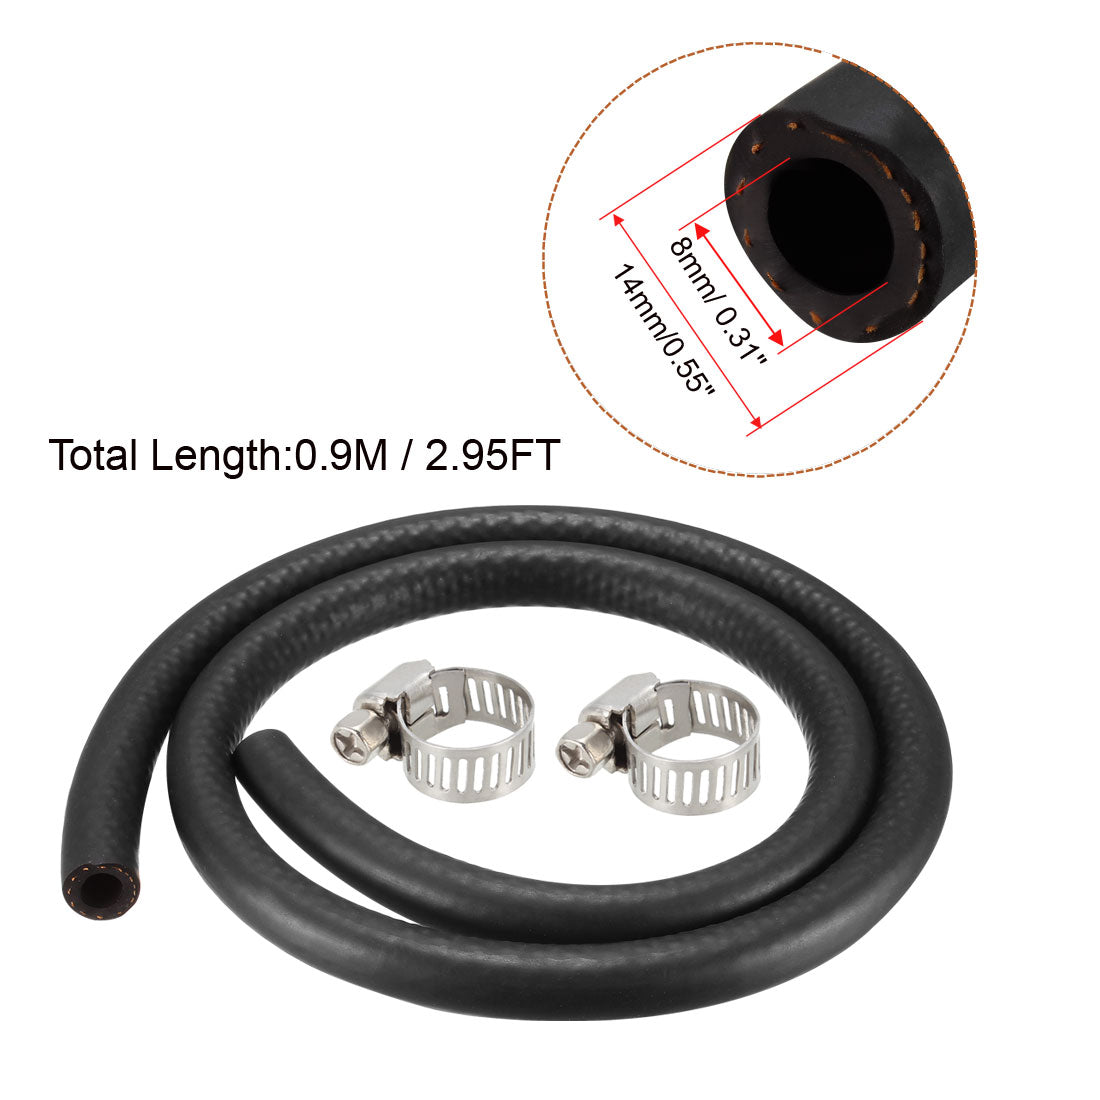 uxcell Uxcell Fuel Line Fuel Hose Rubber  8mm I.D.  0.9M/2.95FT  Diesel Petrol Hose Engine Pipe Tubing with 2 Clamps